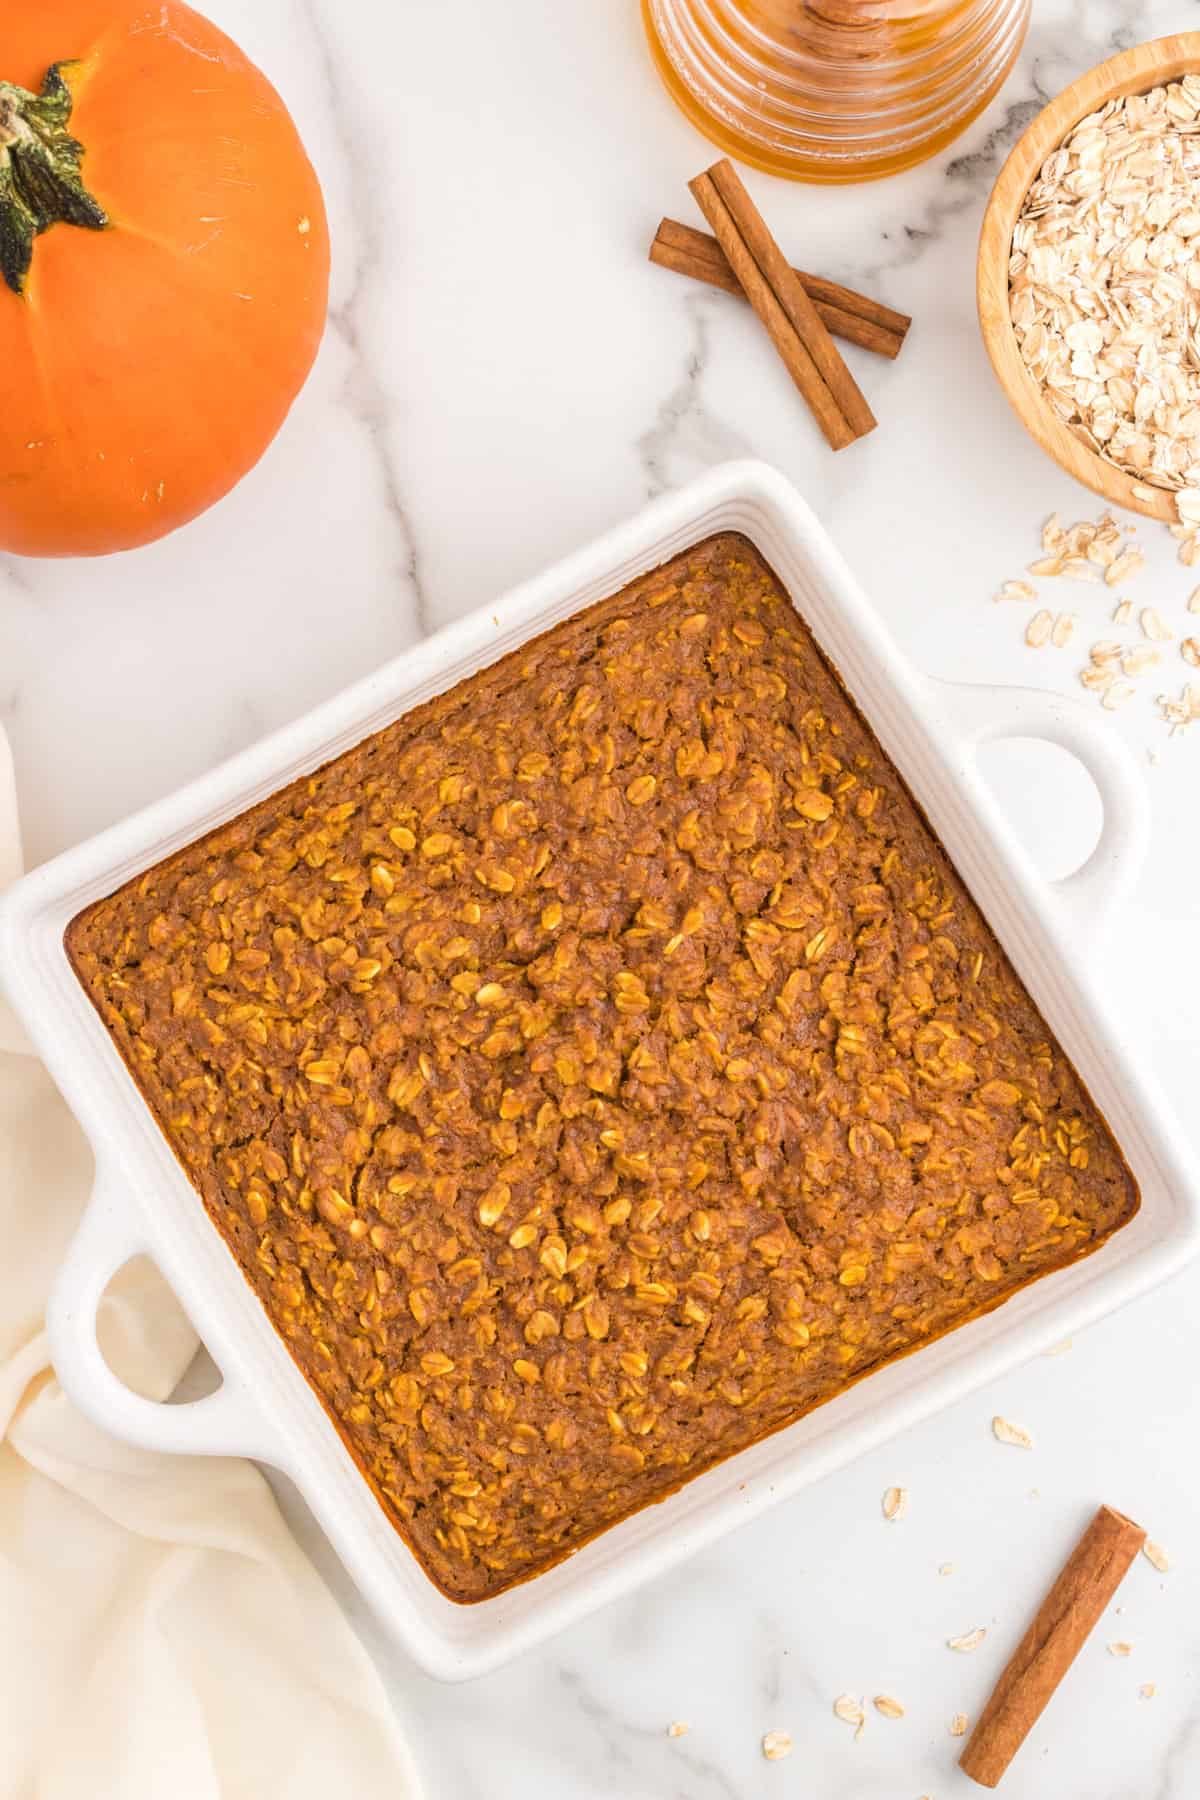 Baked Pumpkin Oatmeal recipe in square baking dish baked to a golden brown